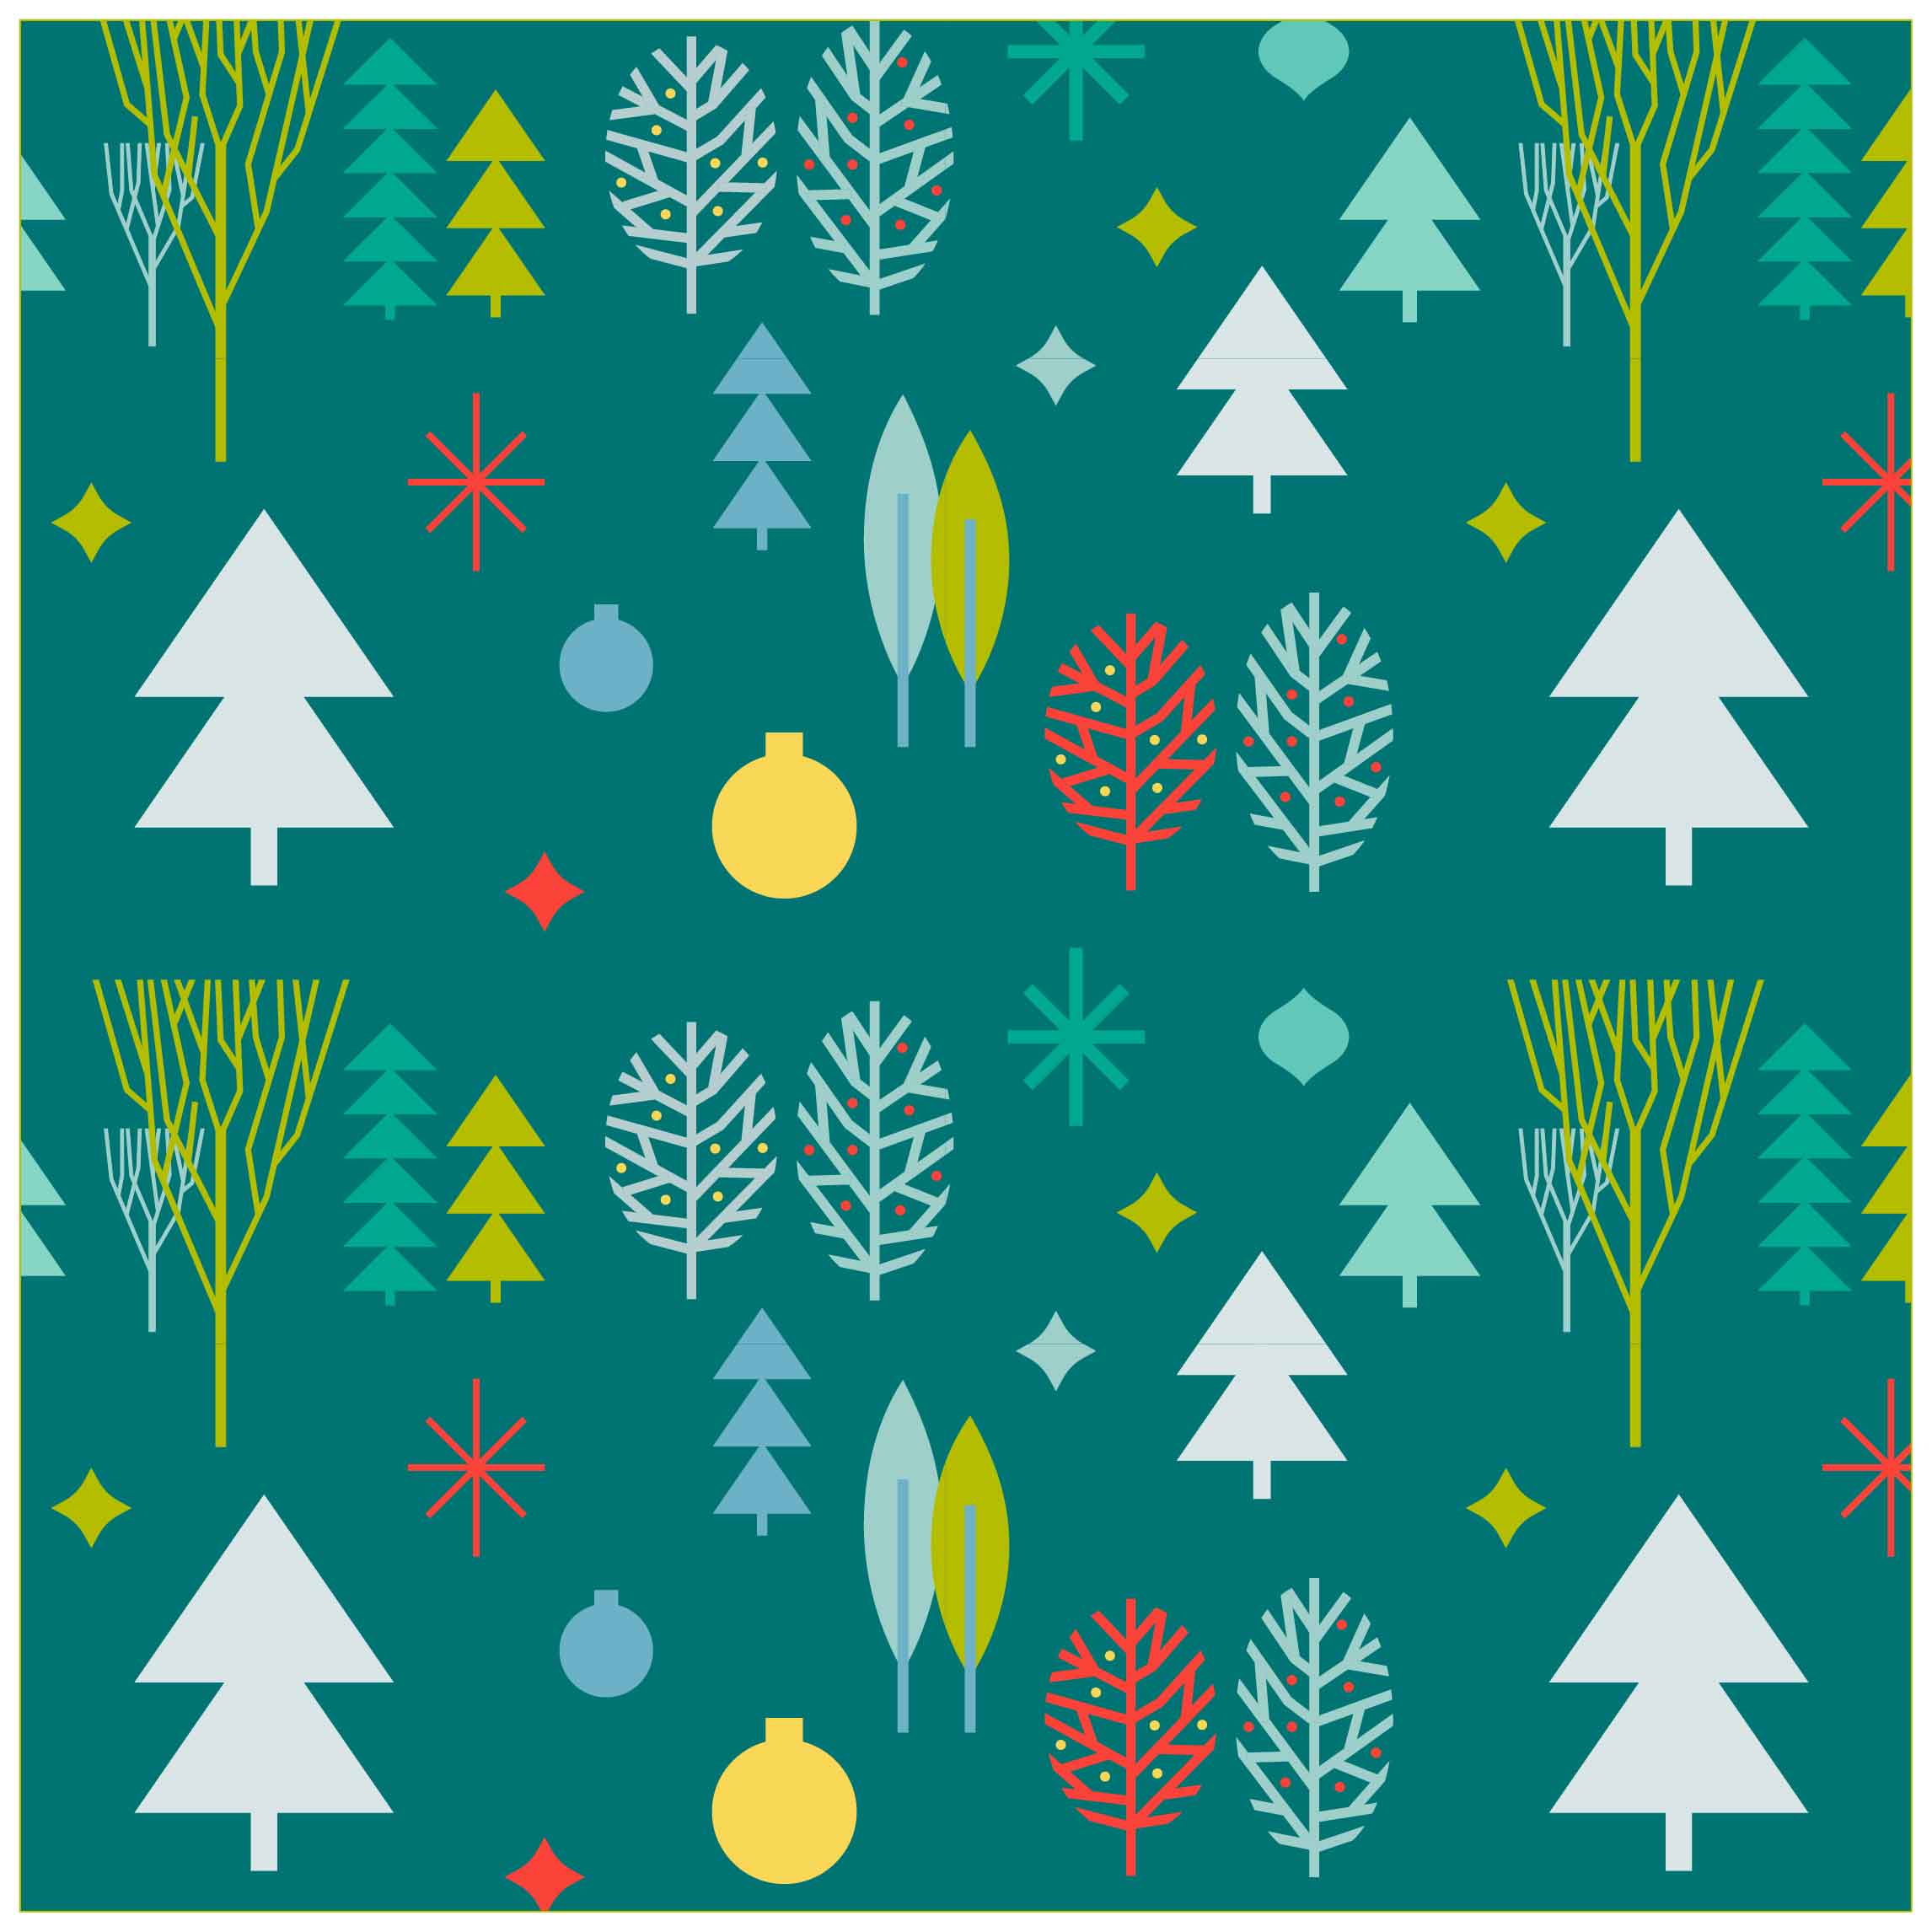 Christmas Tree Geometric Pattern with Christmas elements and icons preview image.